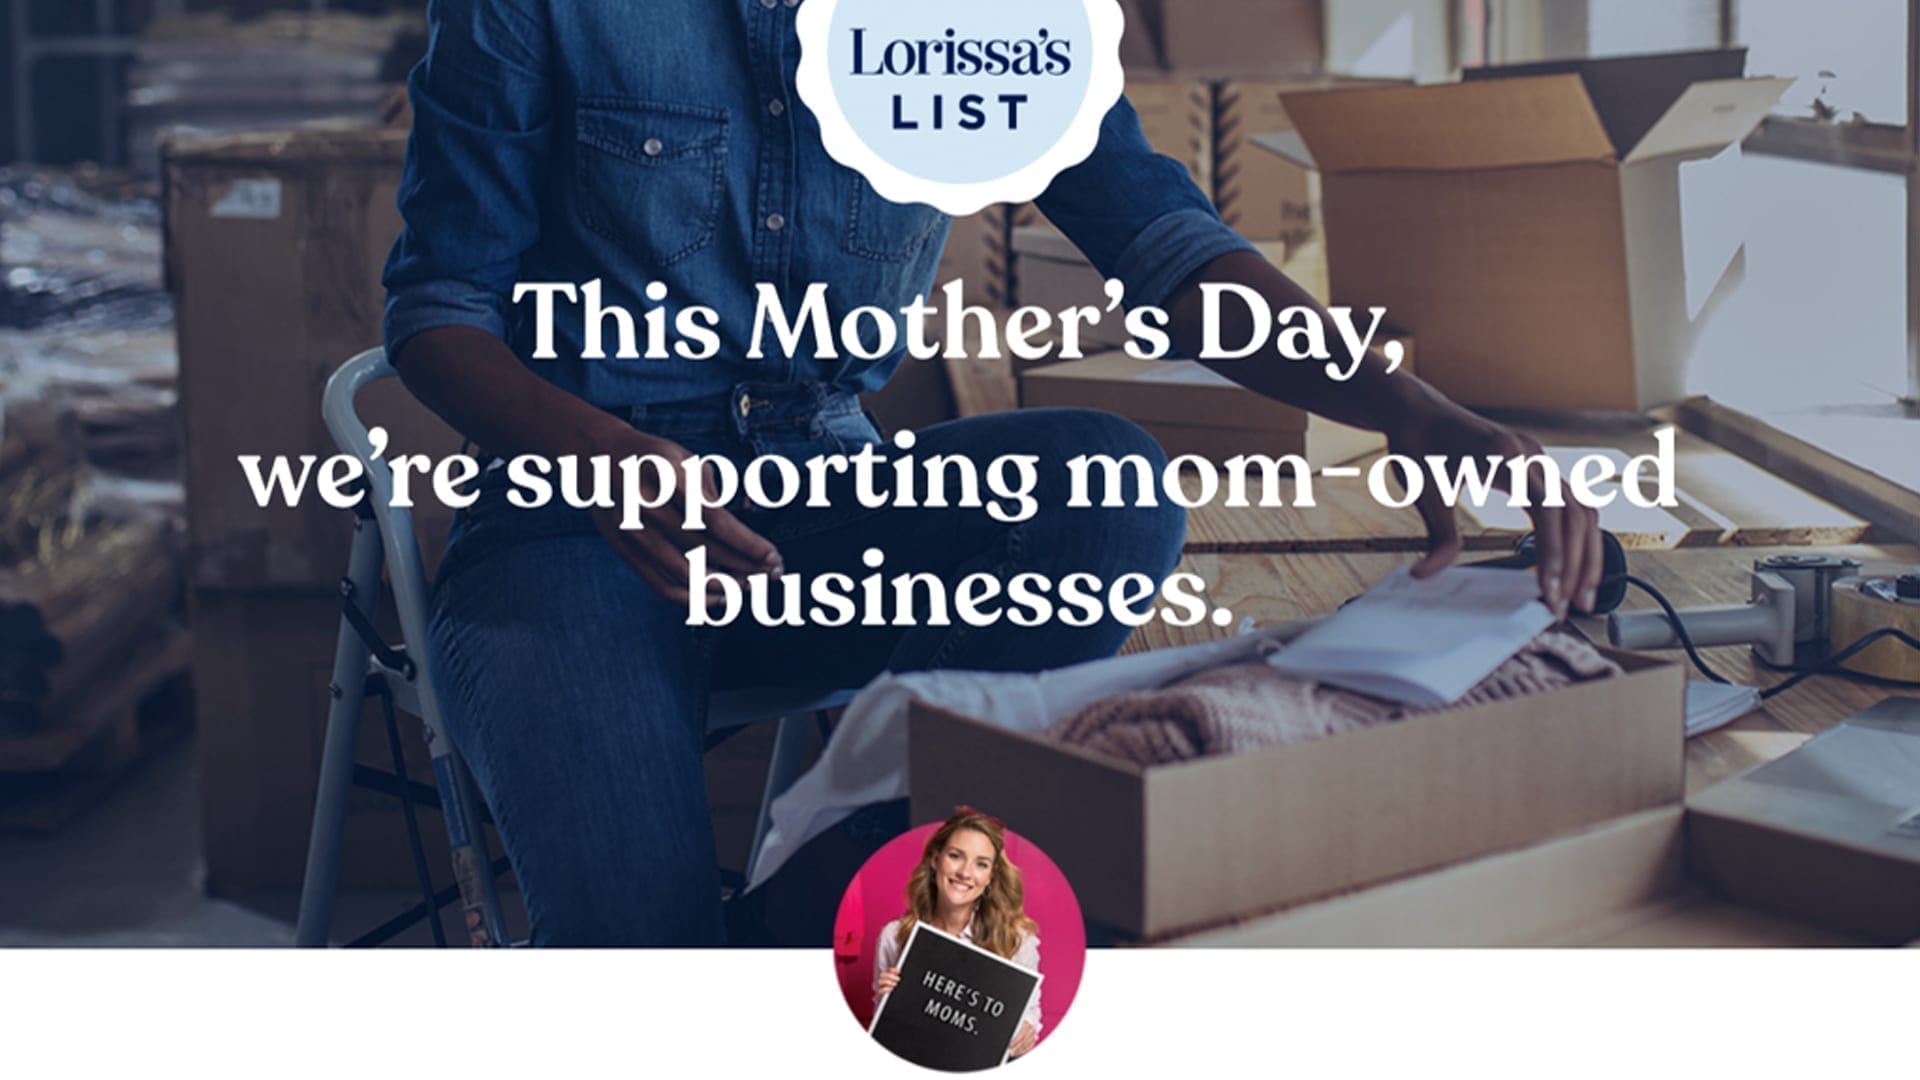 How Marketers Can Win Moms’ Hearts - Lorissa's List: This Mothers's Day, we're supporting mom-owned businesses